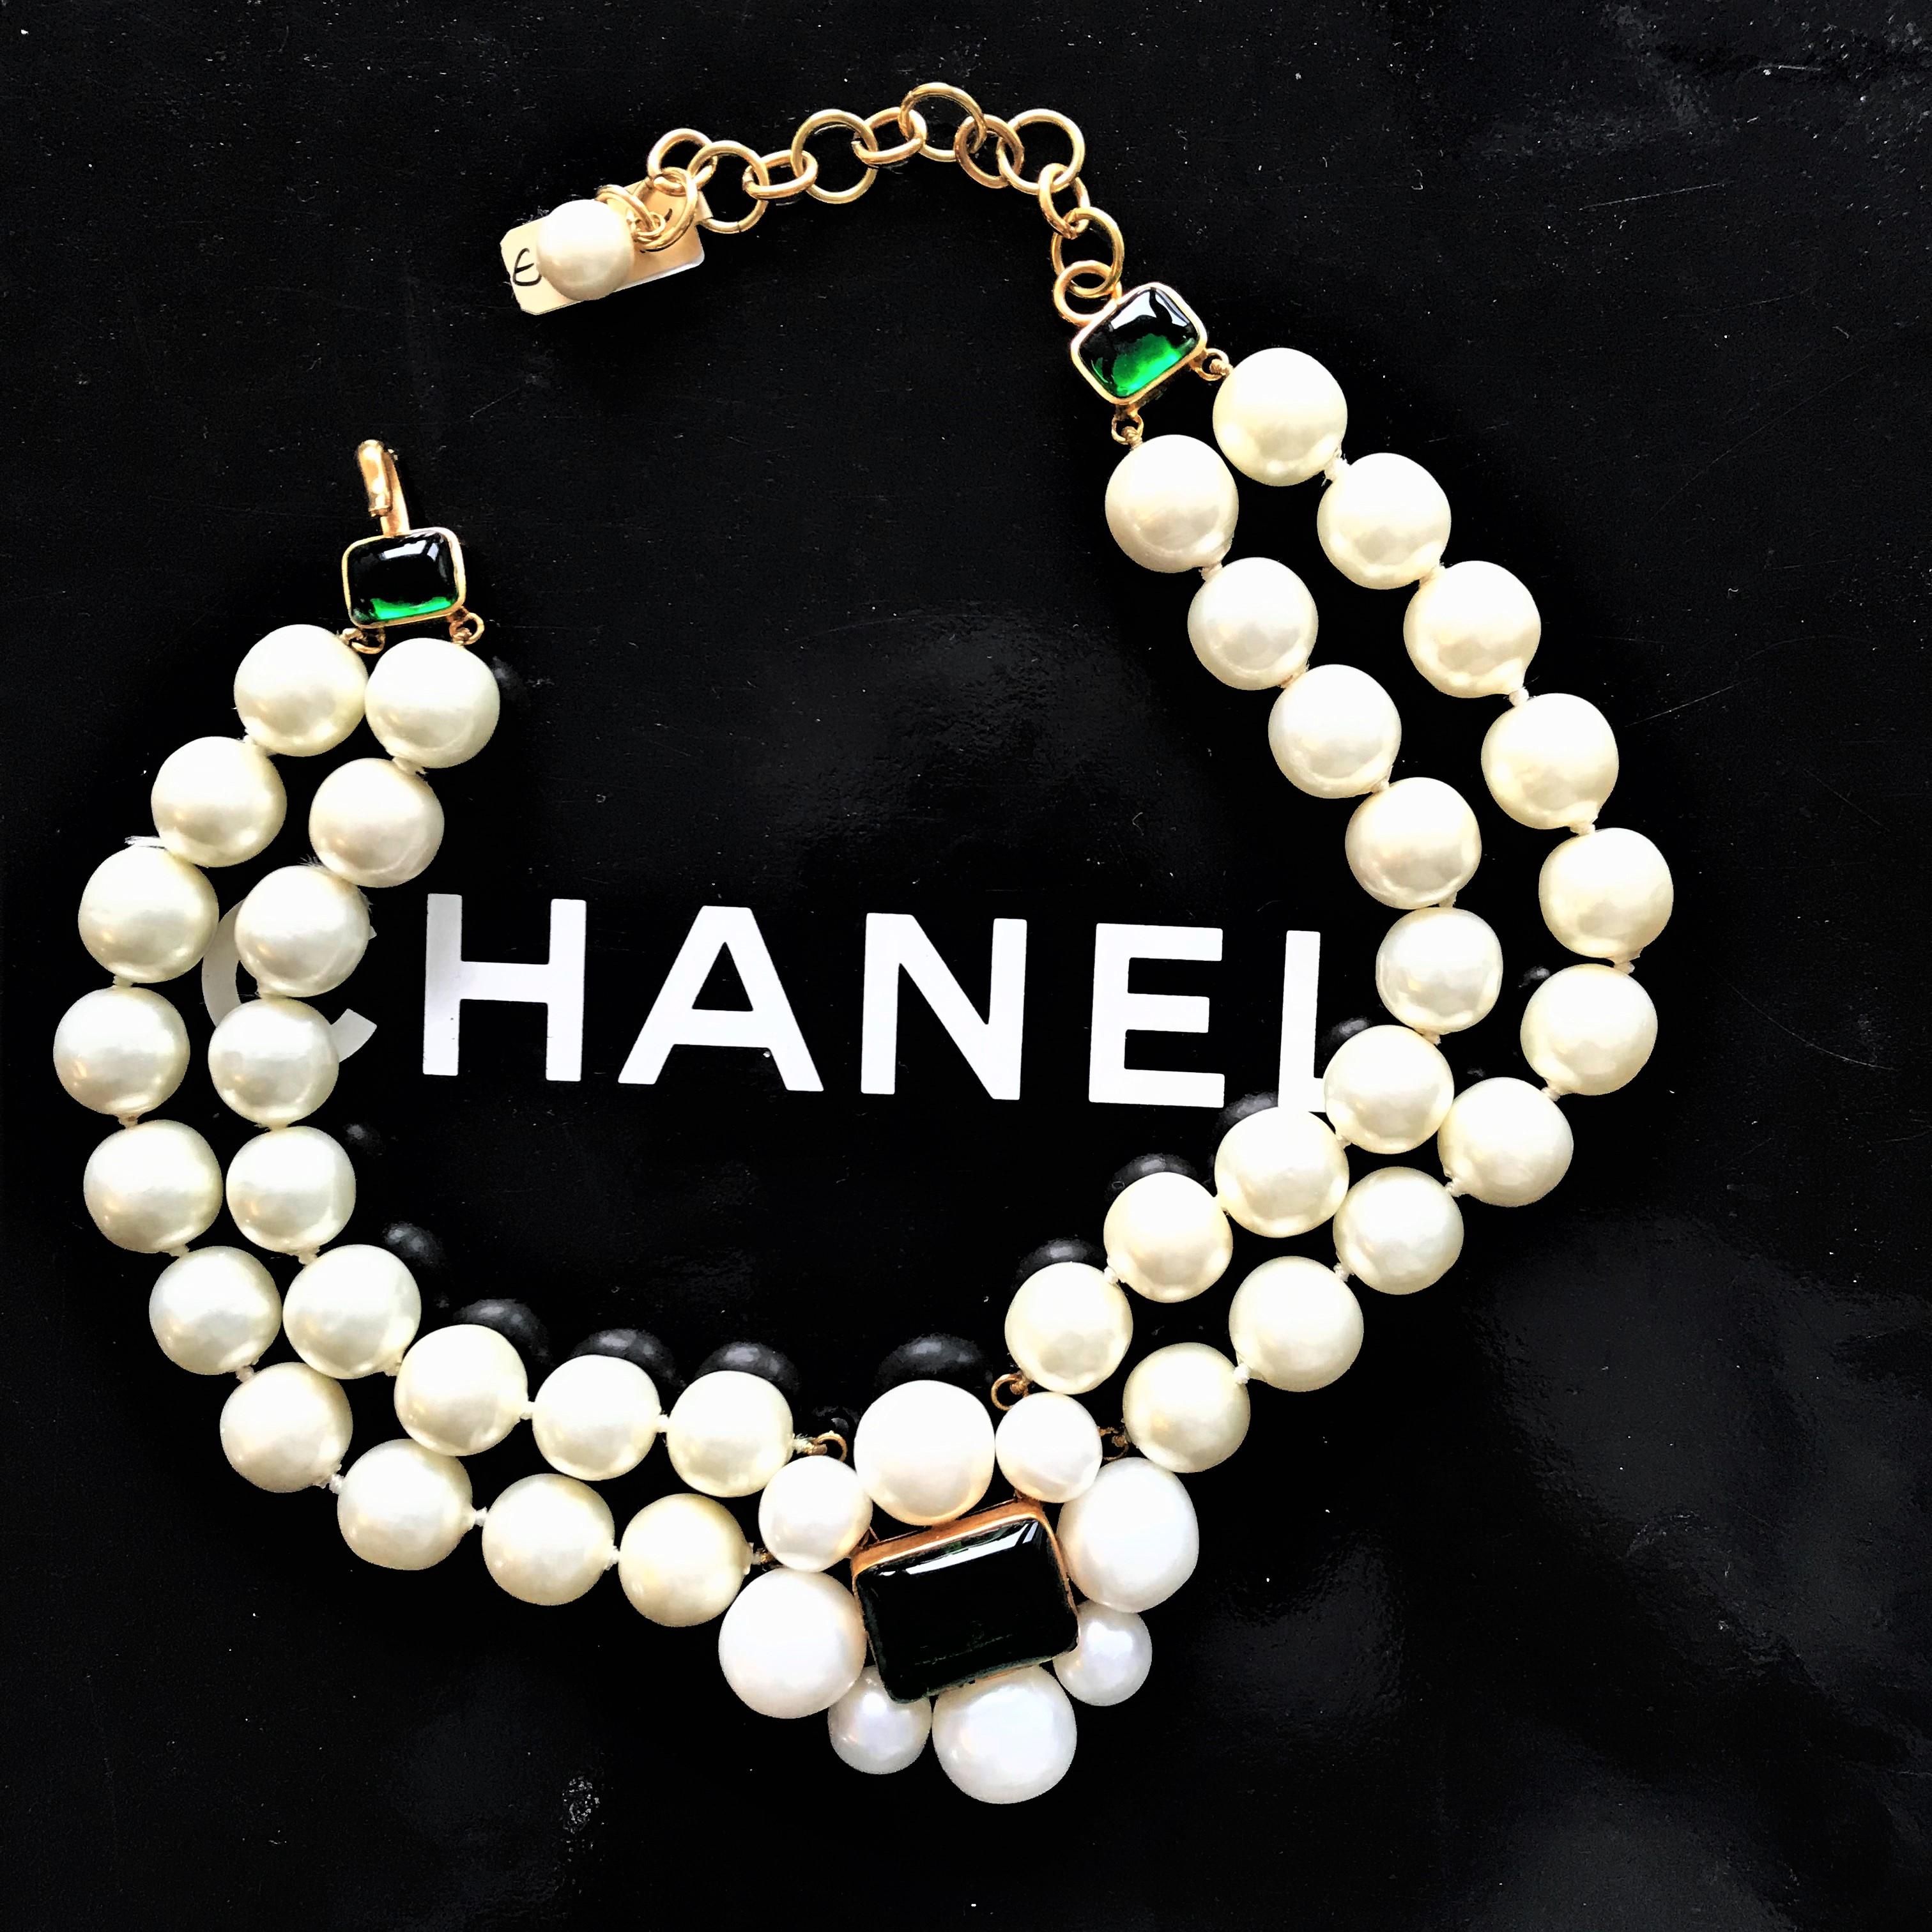 Artisan CHANEL 2 row collier with larg pearls,  green Gripoix signed 97A - 1997 Autumn For Sale